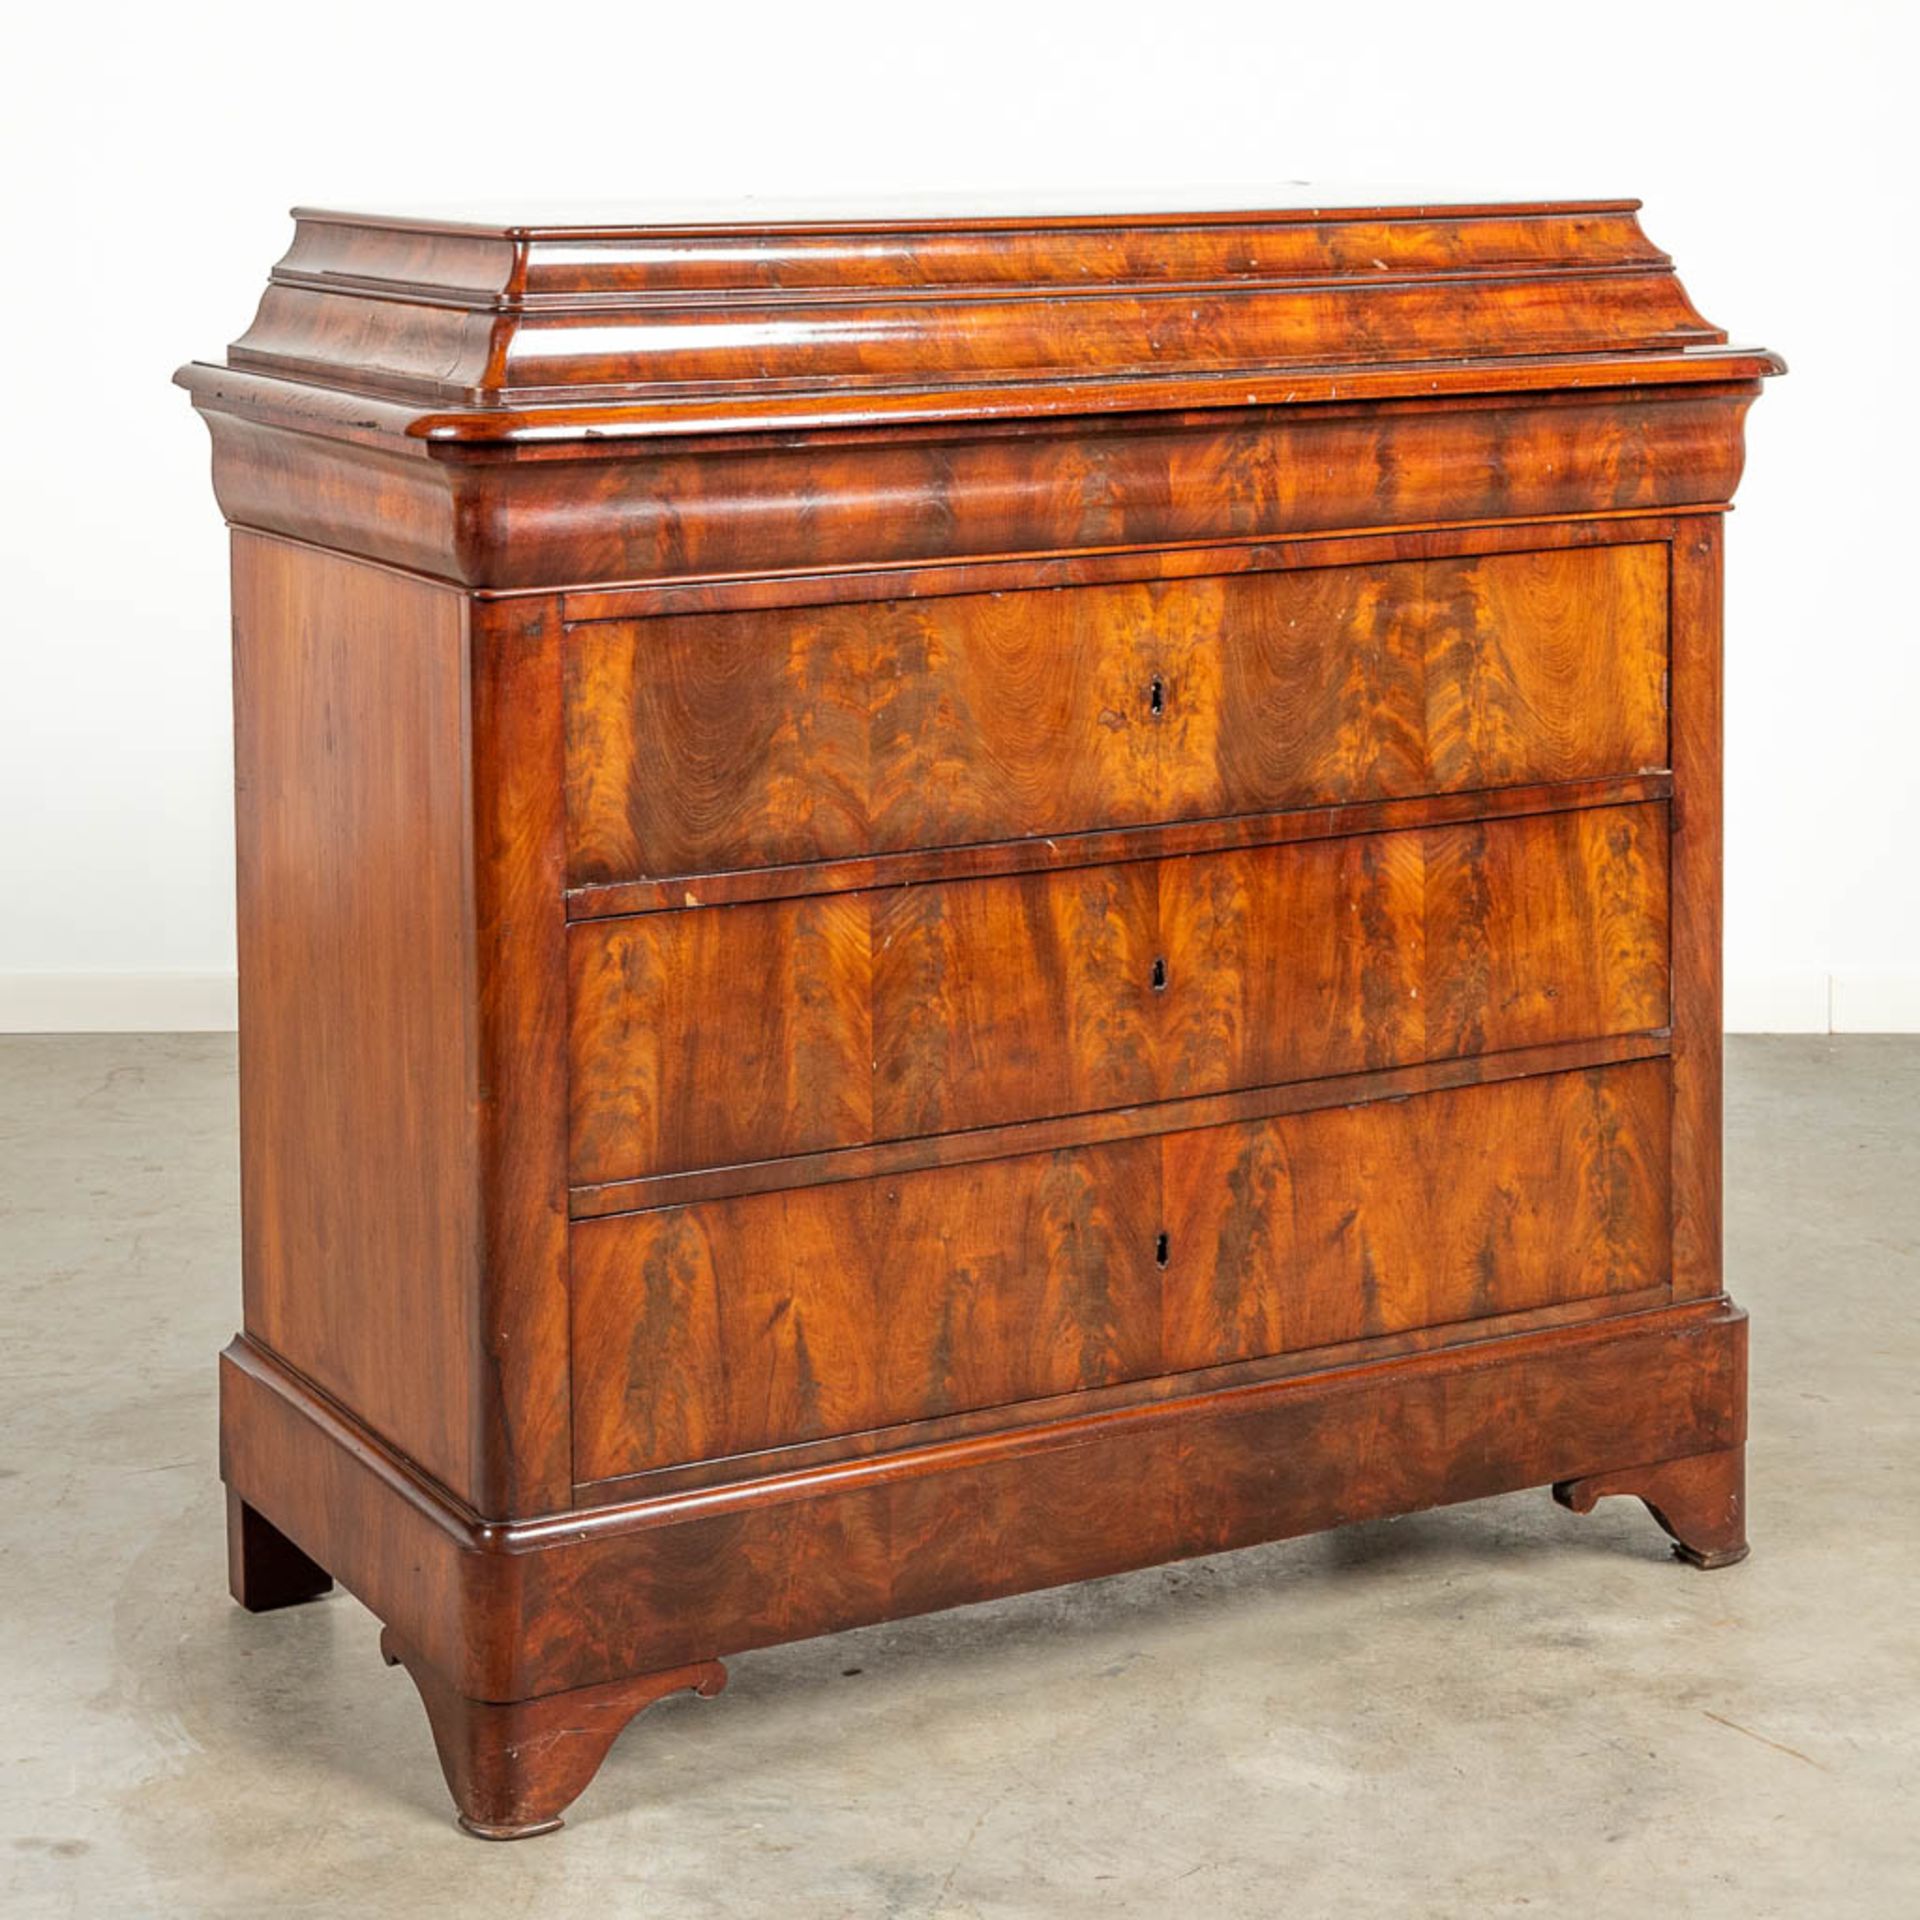 A commode with washing table, made during the Louis Philippe period.